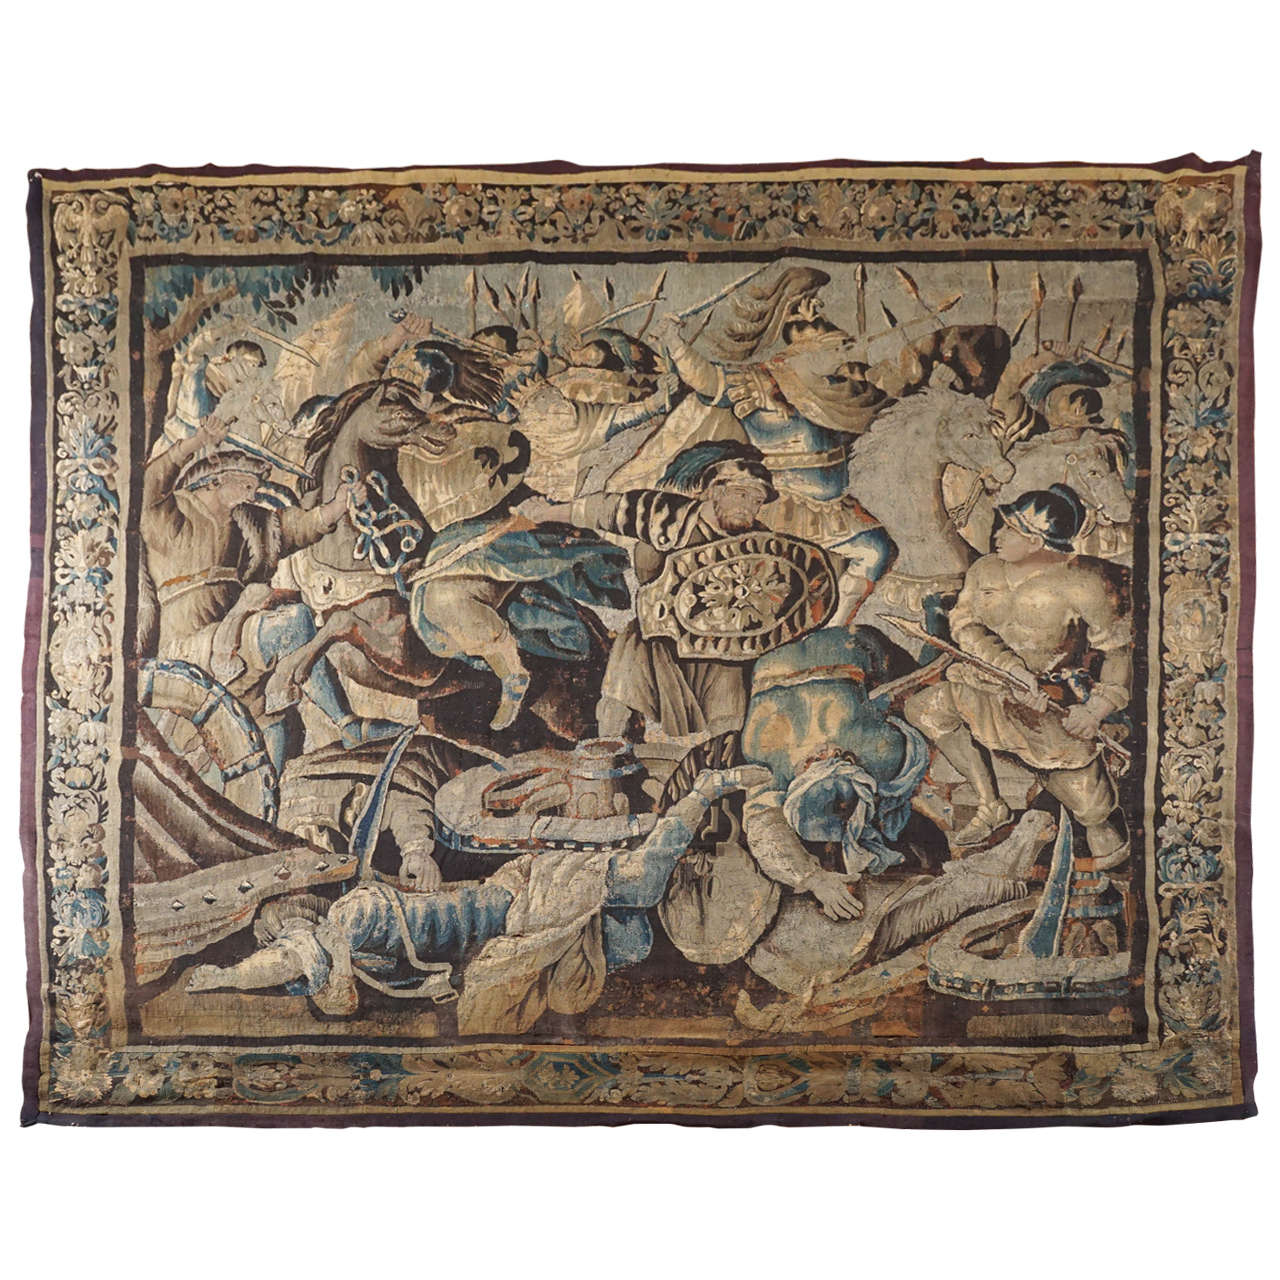 Large Aubusson Tapestry "Story of Alexander the Great, " France, circa 1670